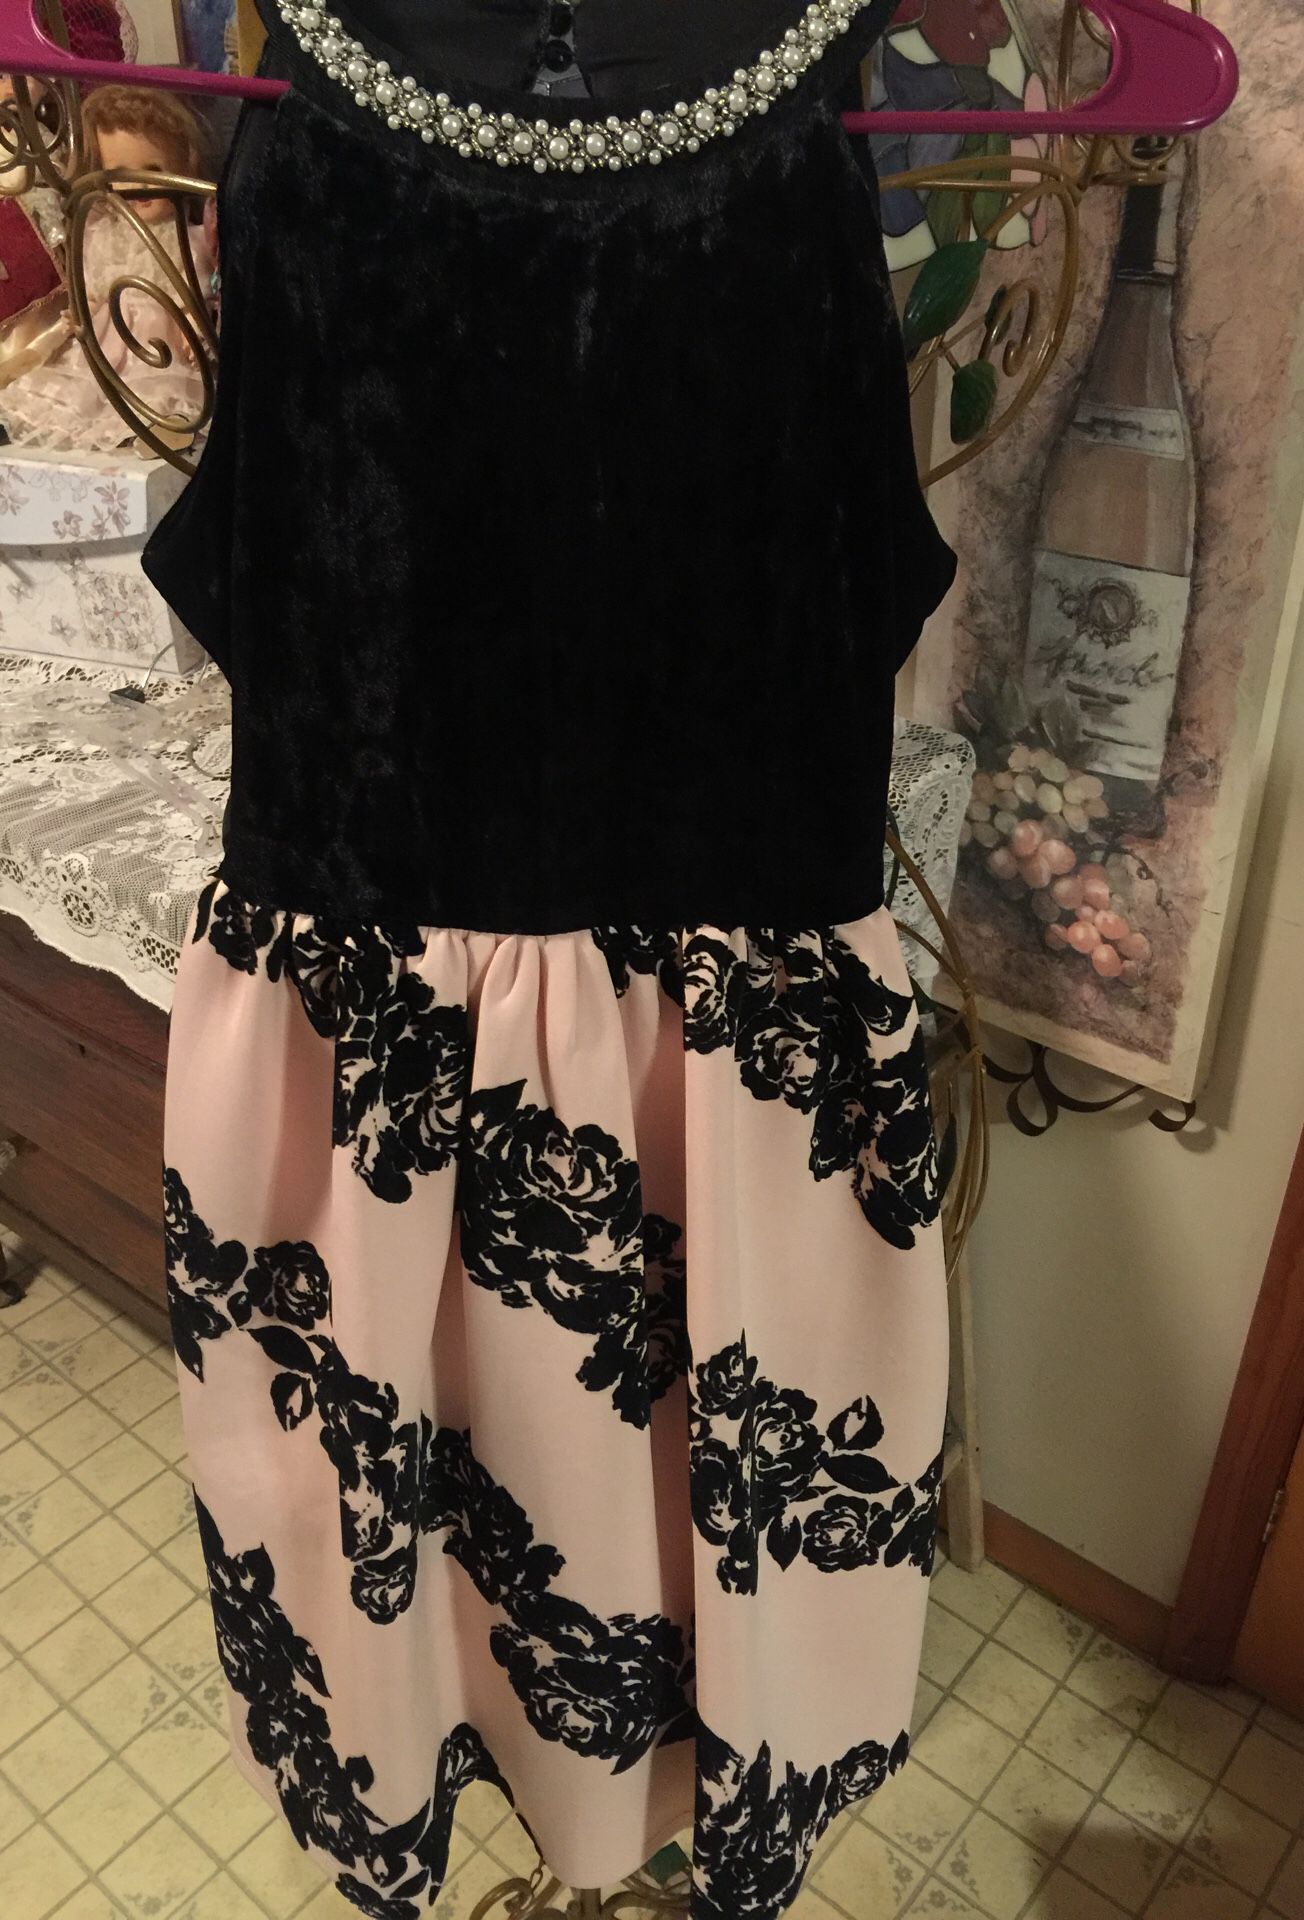 Designer gorgeous dress size 10 misses velvet top with stunning pearl neckline bottom pleated salmon pink soft knit with vertical rows of black velve